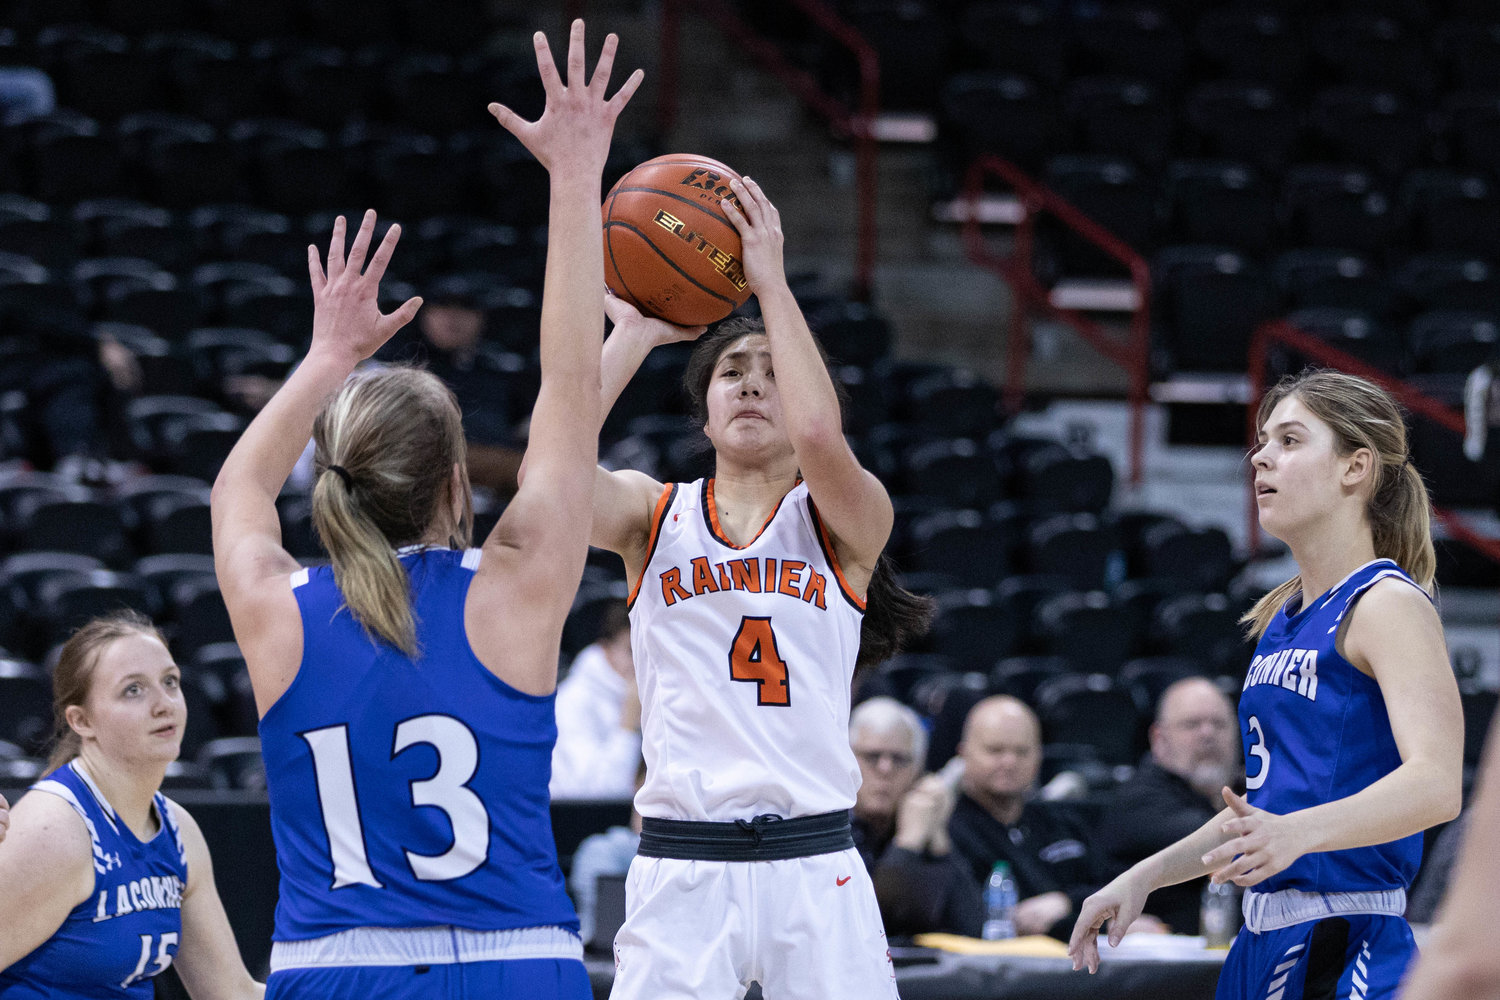 Rainier guard Angelica Askey rises for a jumper against La Conner in the 2B state consolation semifinals at Spokane Arena March 3.